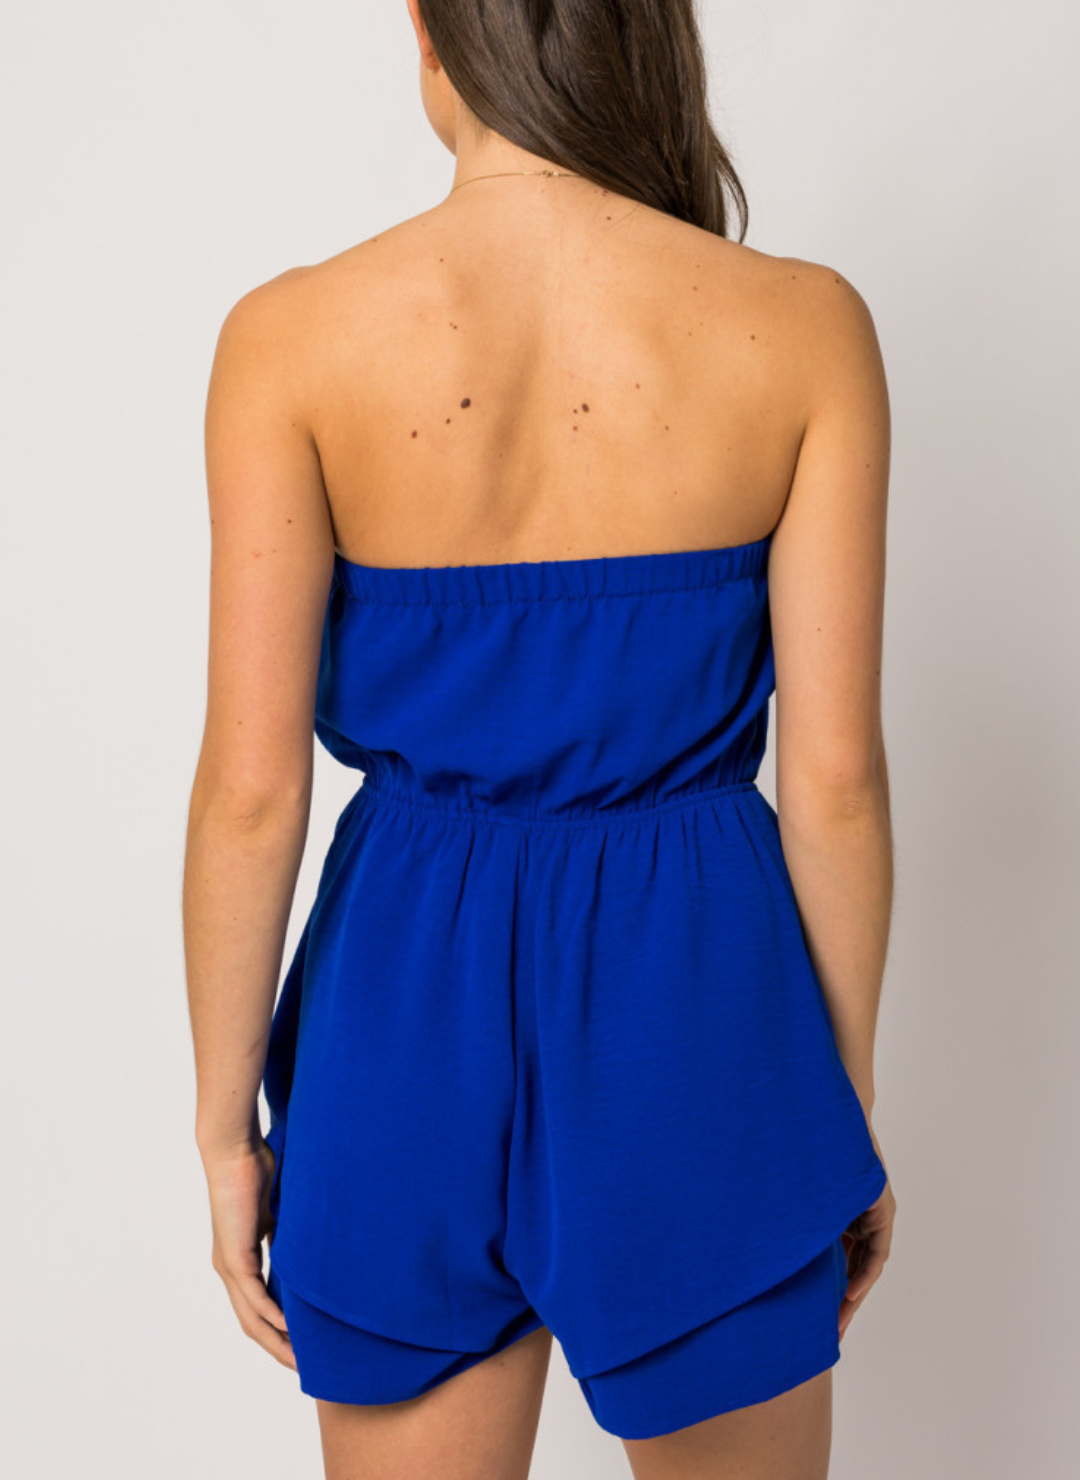 Back view of model wearing blue Pool Party Romper. White background. 